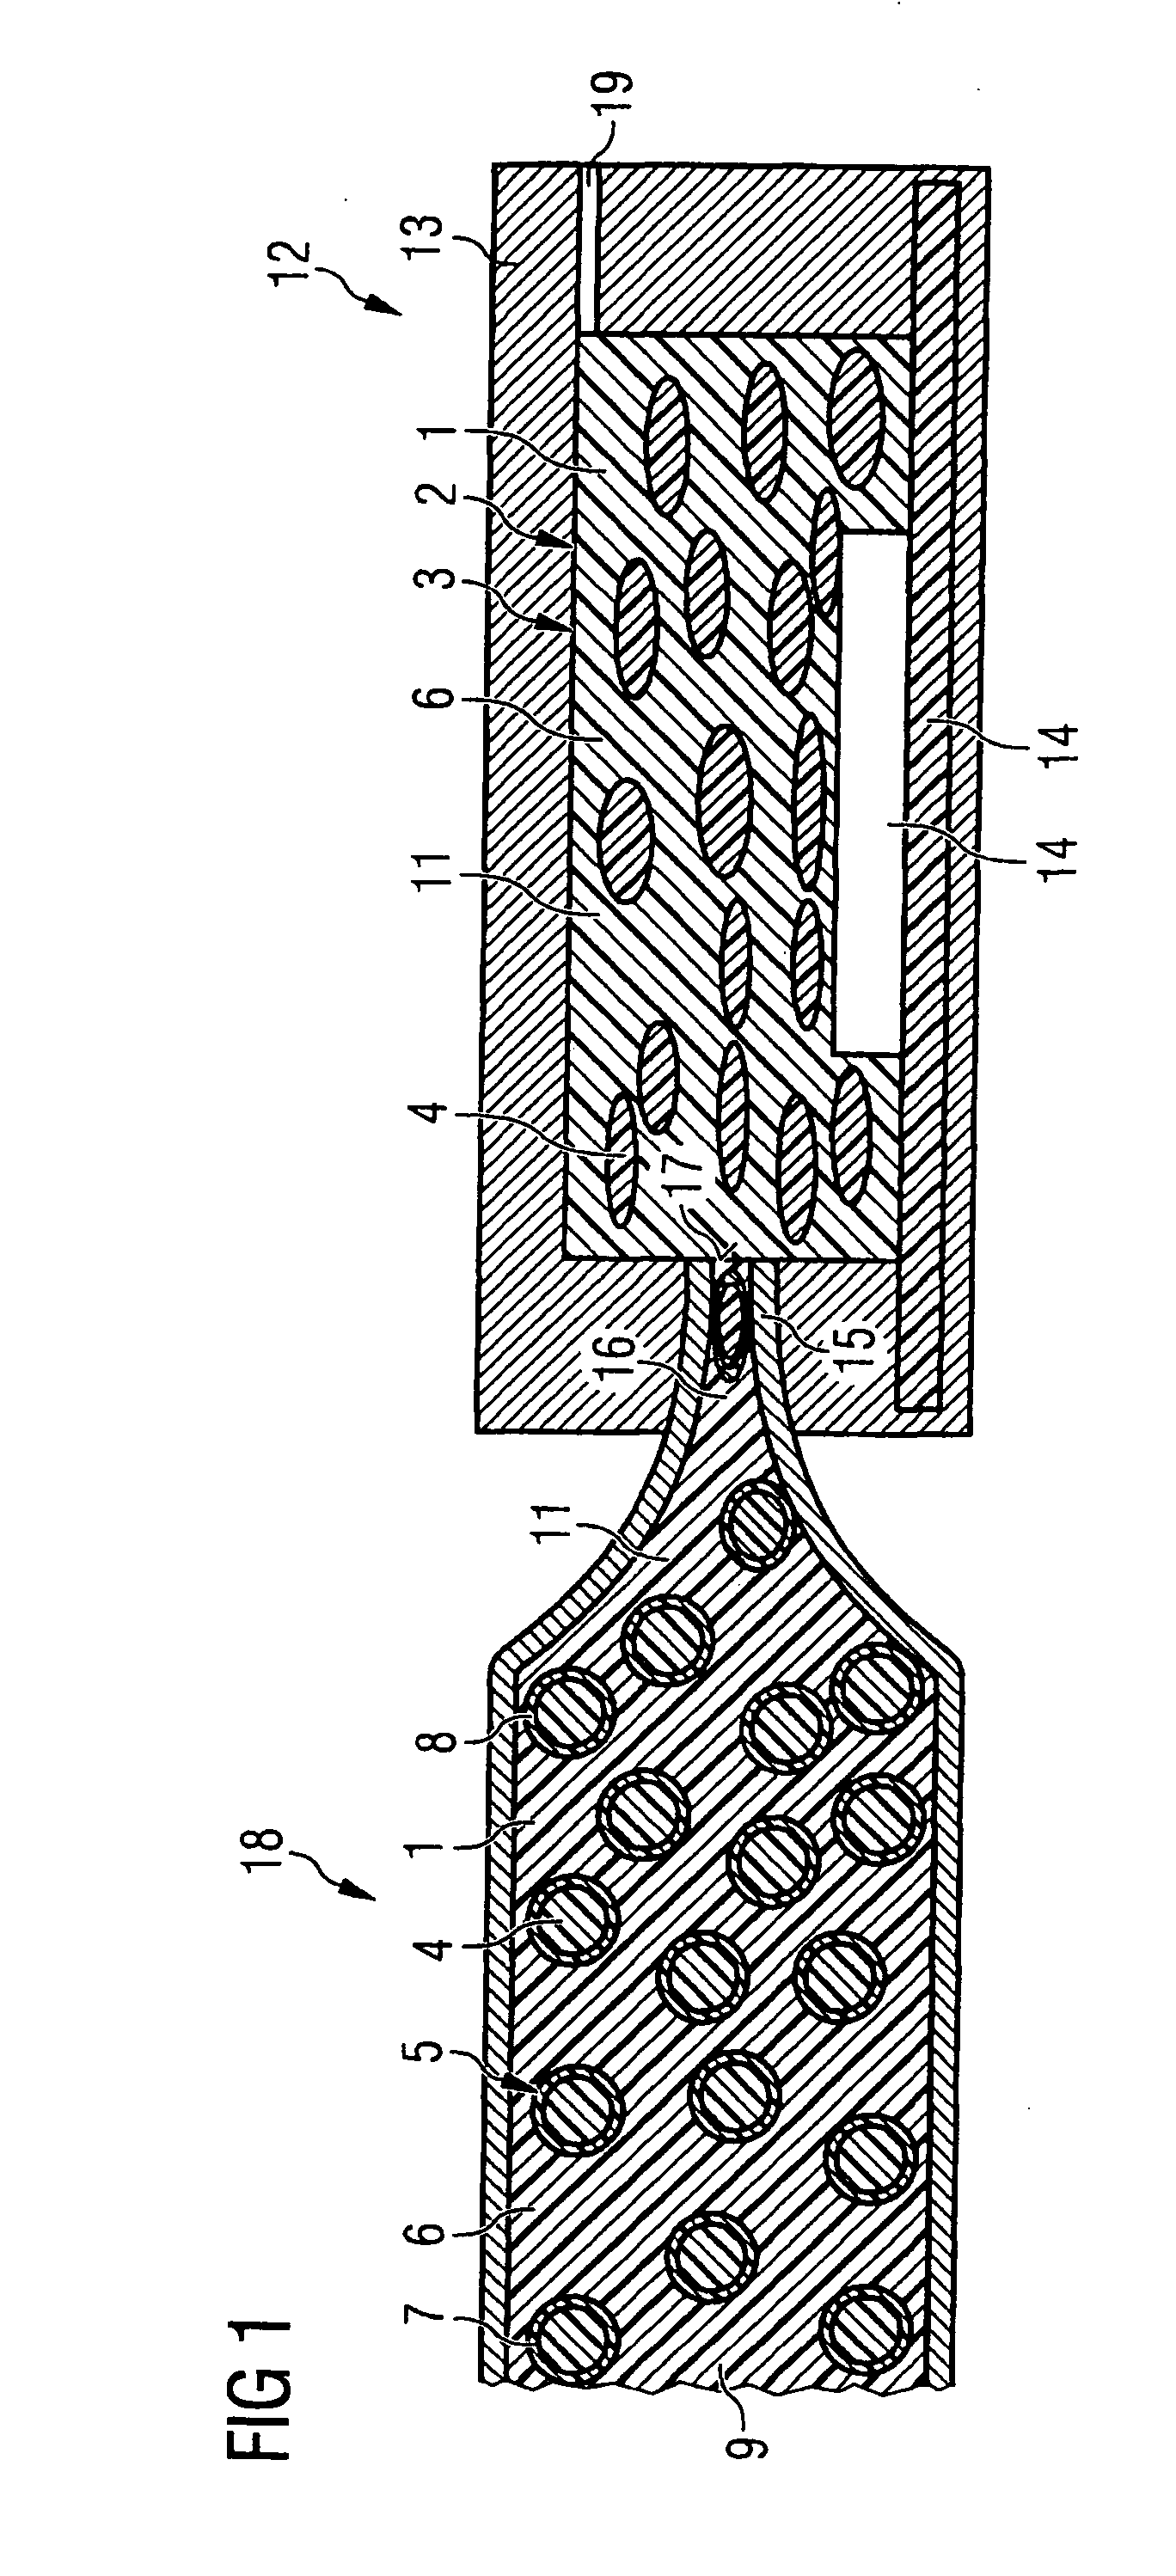 Plastic housing composition for embedding semicondutor devices in a plastic housing and use of the plastic housing composition